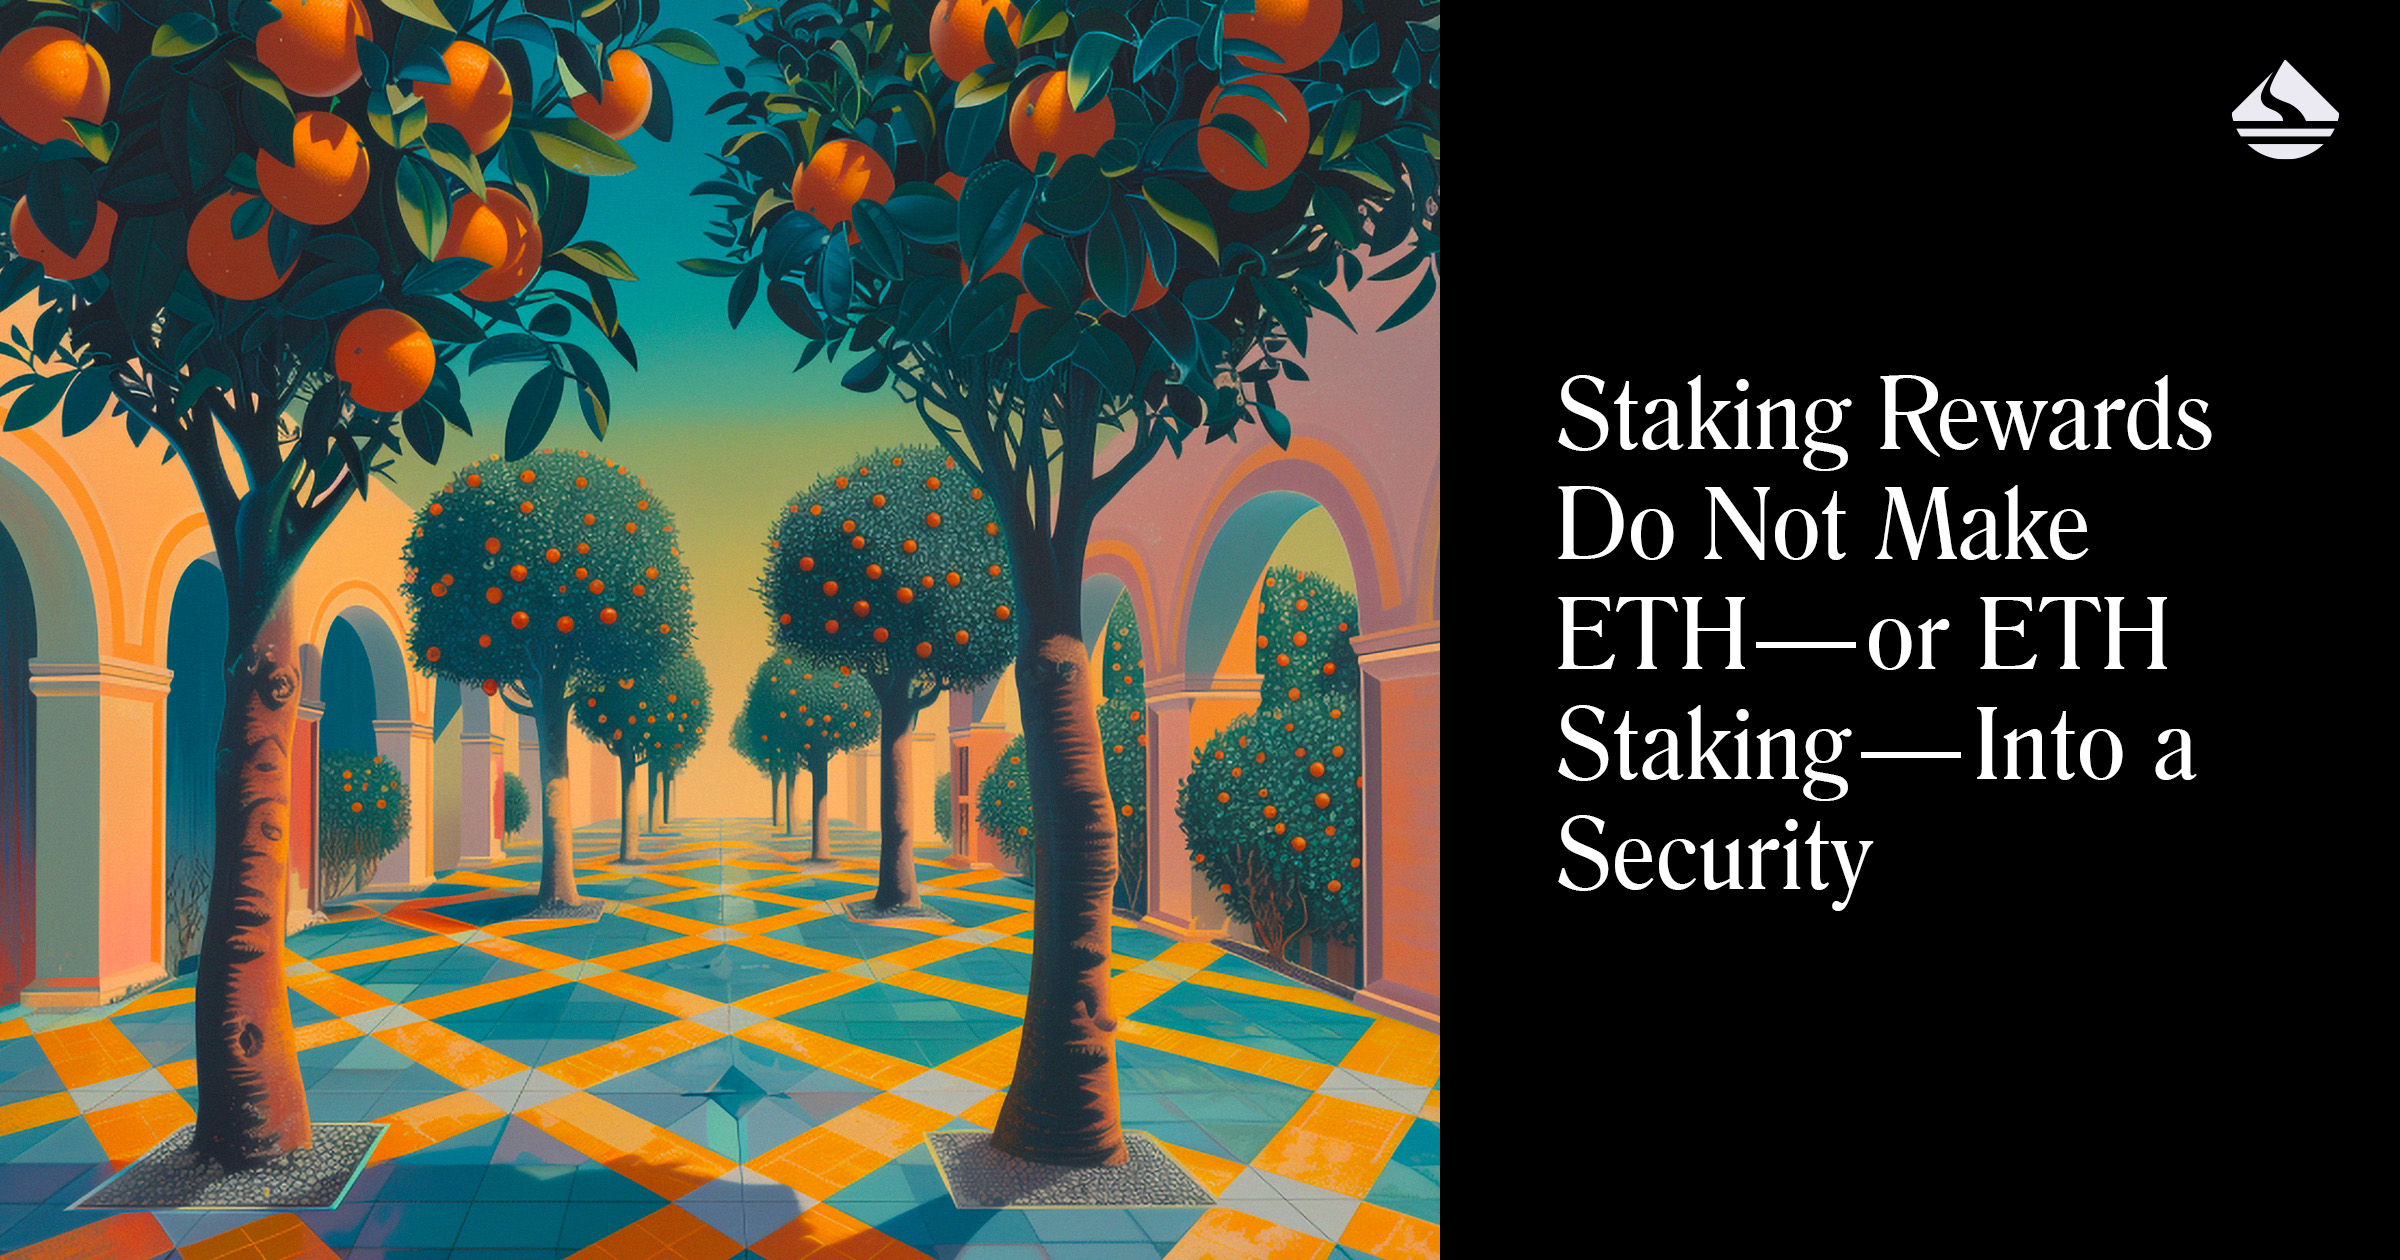 Staking rewards do not make ETH — or ETH staking — into a security